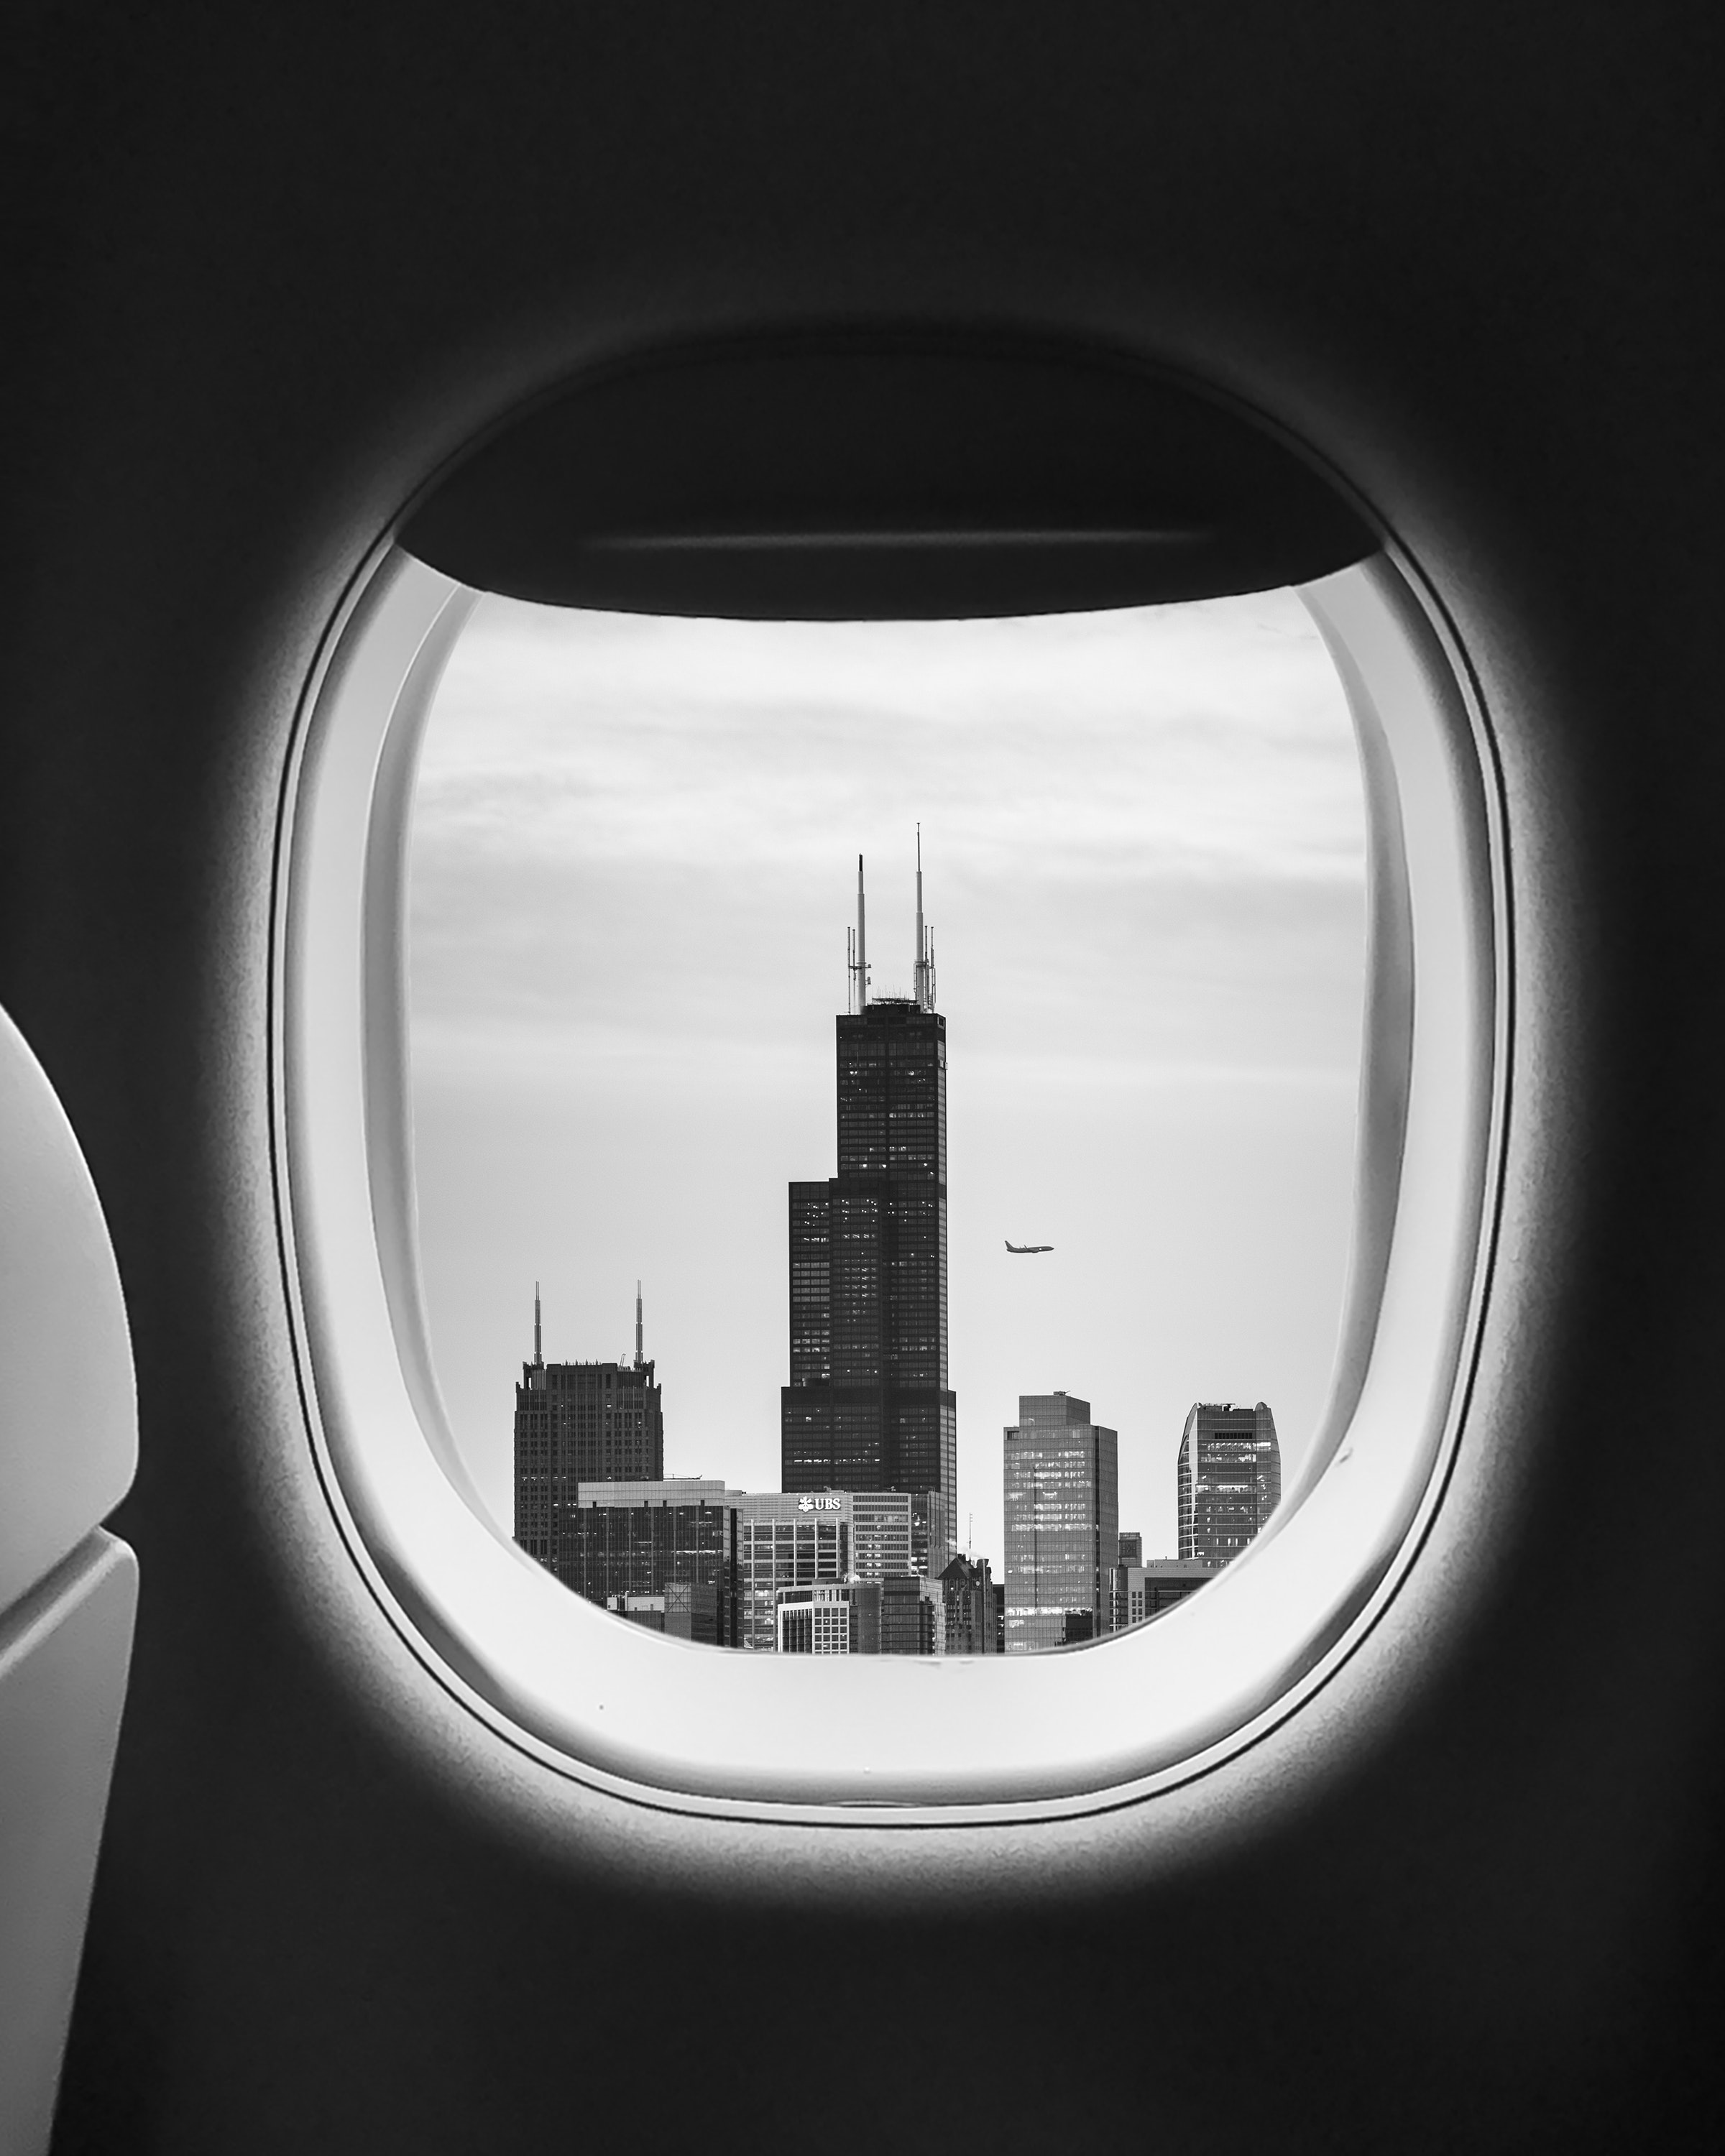 a window of an airplane with a tall building in the distance